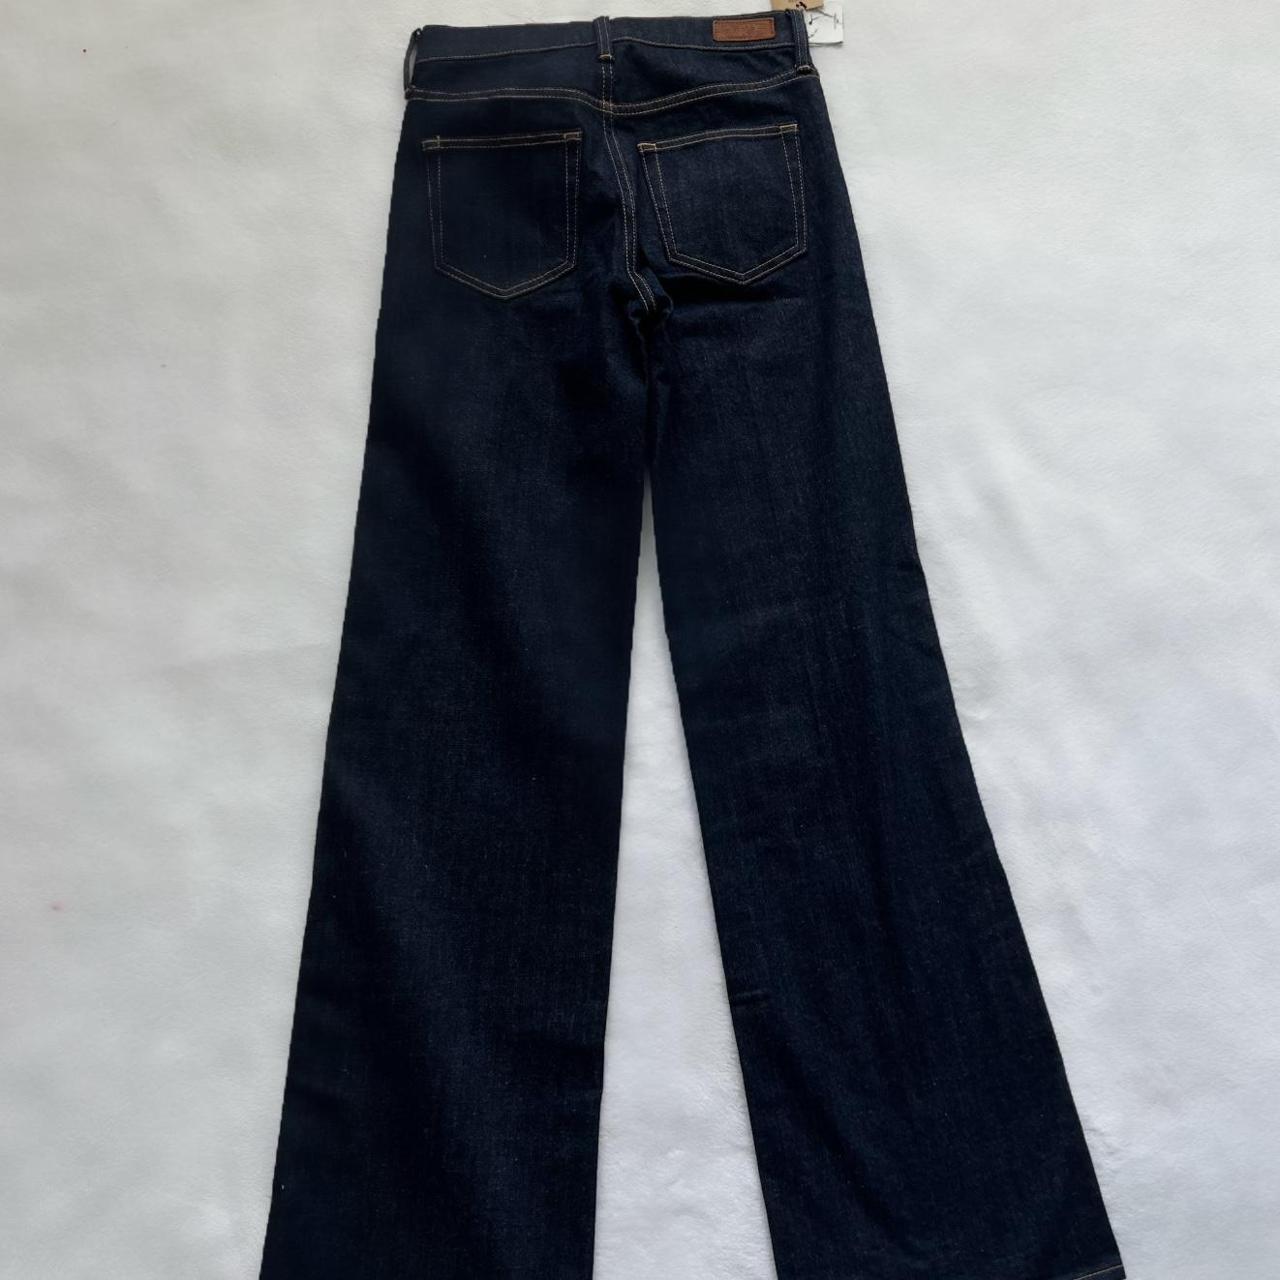 Polo Ralph Lauren Jeans with Embroidery on Sides, New